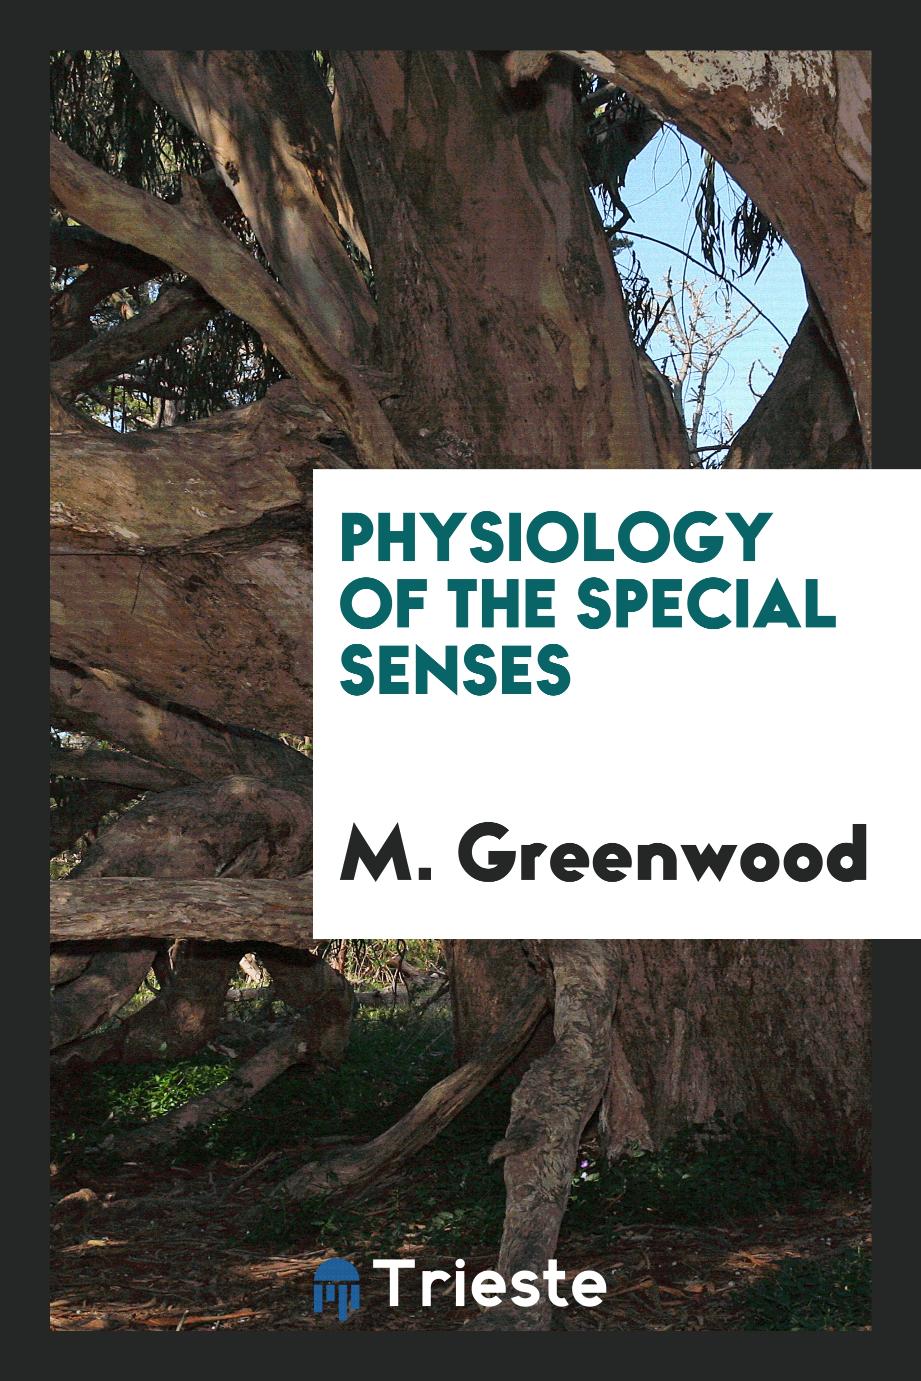 Physiology of the special senses